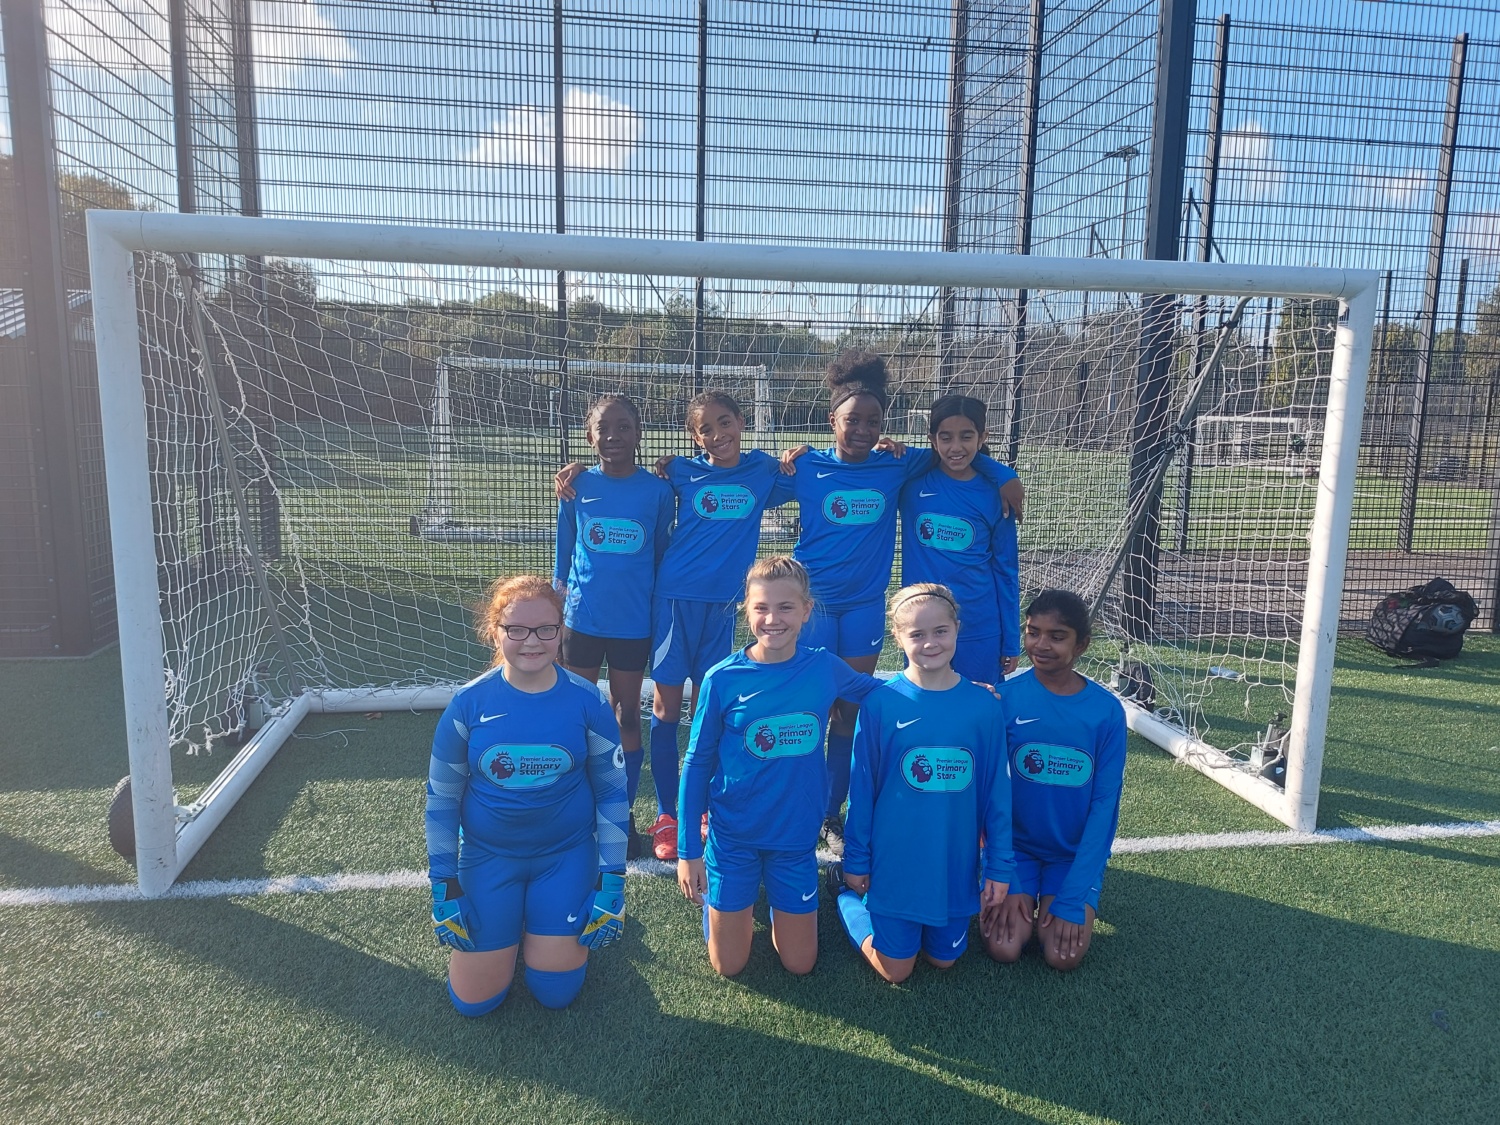 Eight DPA pupils are pictured kneeling down together under a goalpost for a group photo after having enjoyed success in their Football tournament.